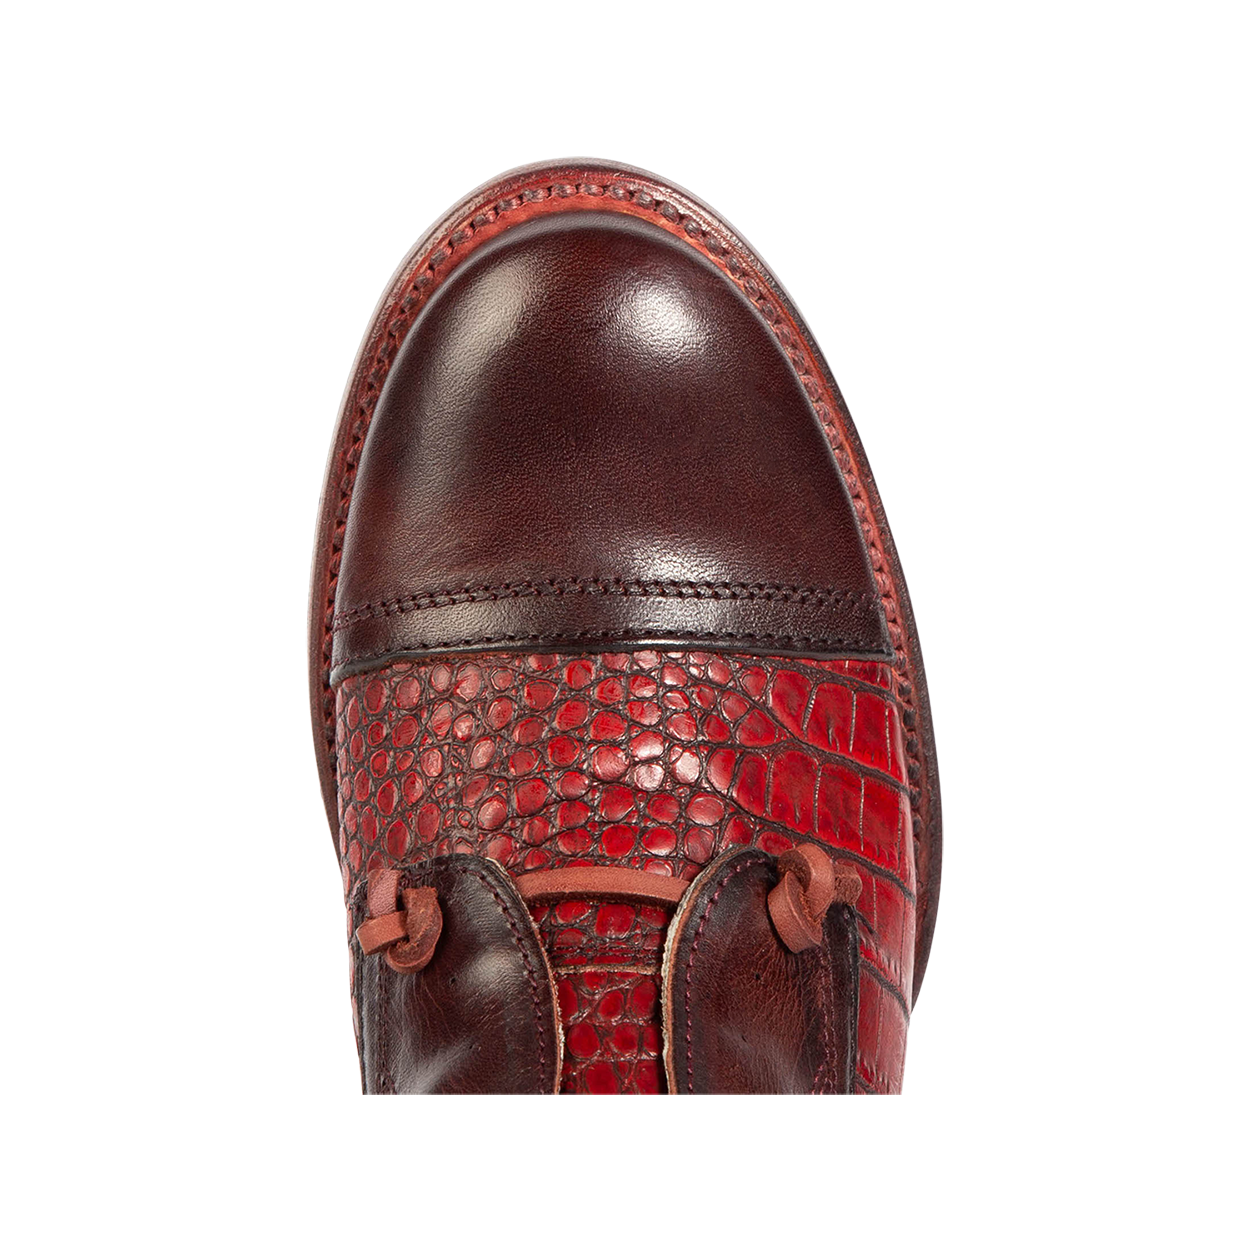 Top view showing almond toe and decorative knotted leather lace on FREEBIRD women's Mabel wine multi shoe